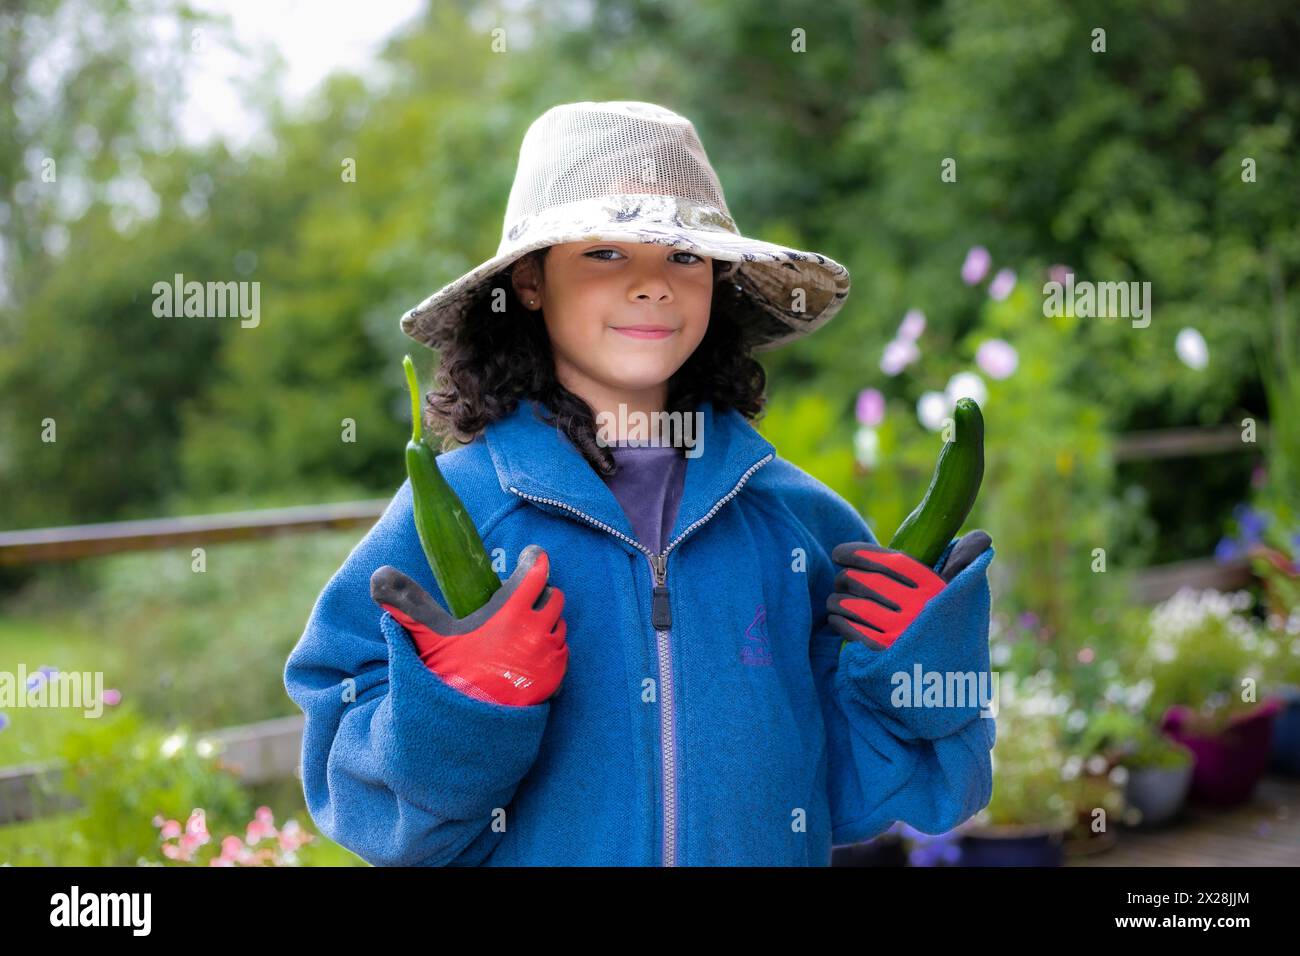 Young girl harvesting vegetables Stock Photo